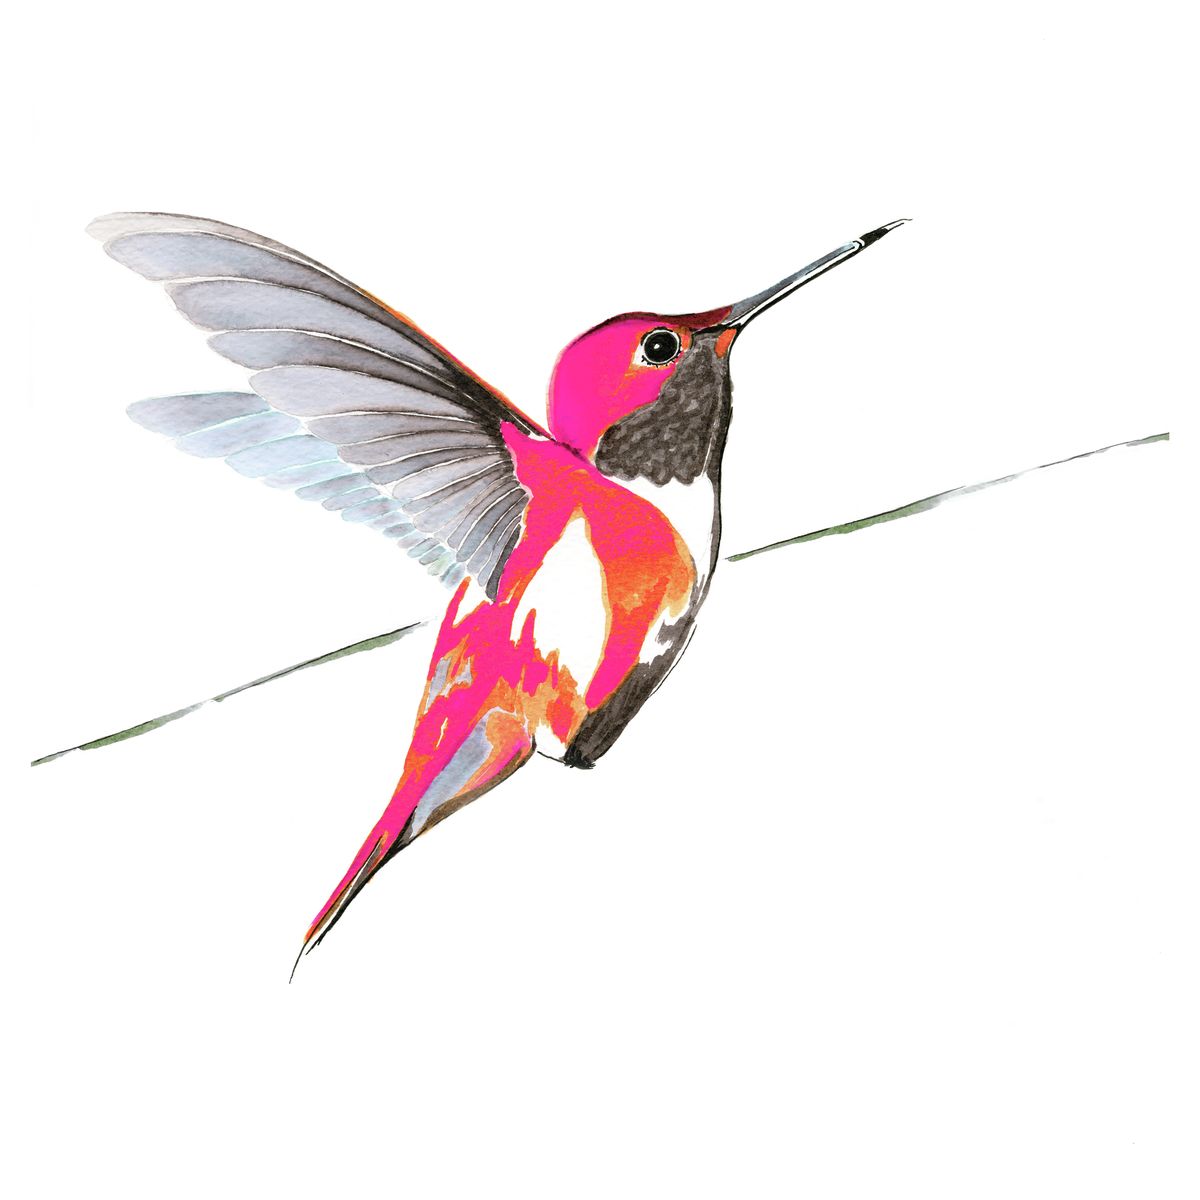 Hummingbird in bright pink print by Anna Jacobs